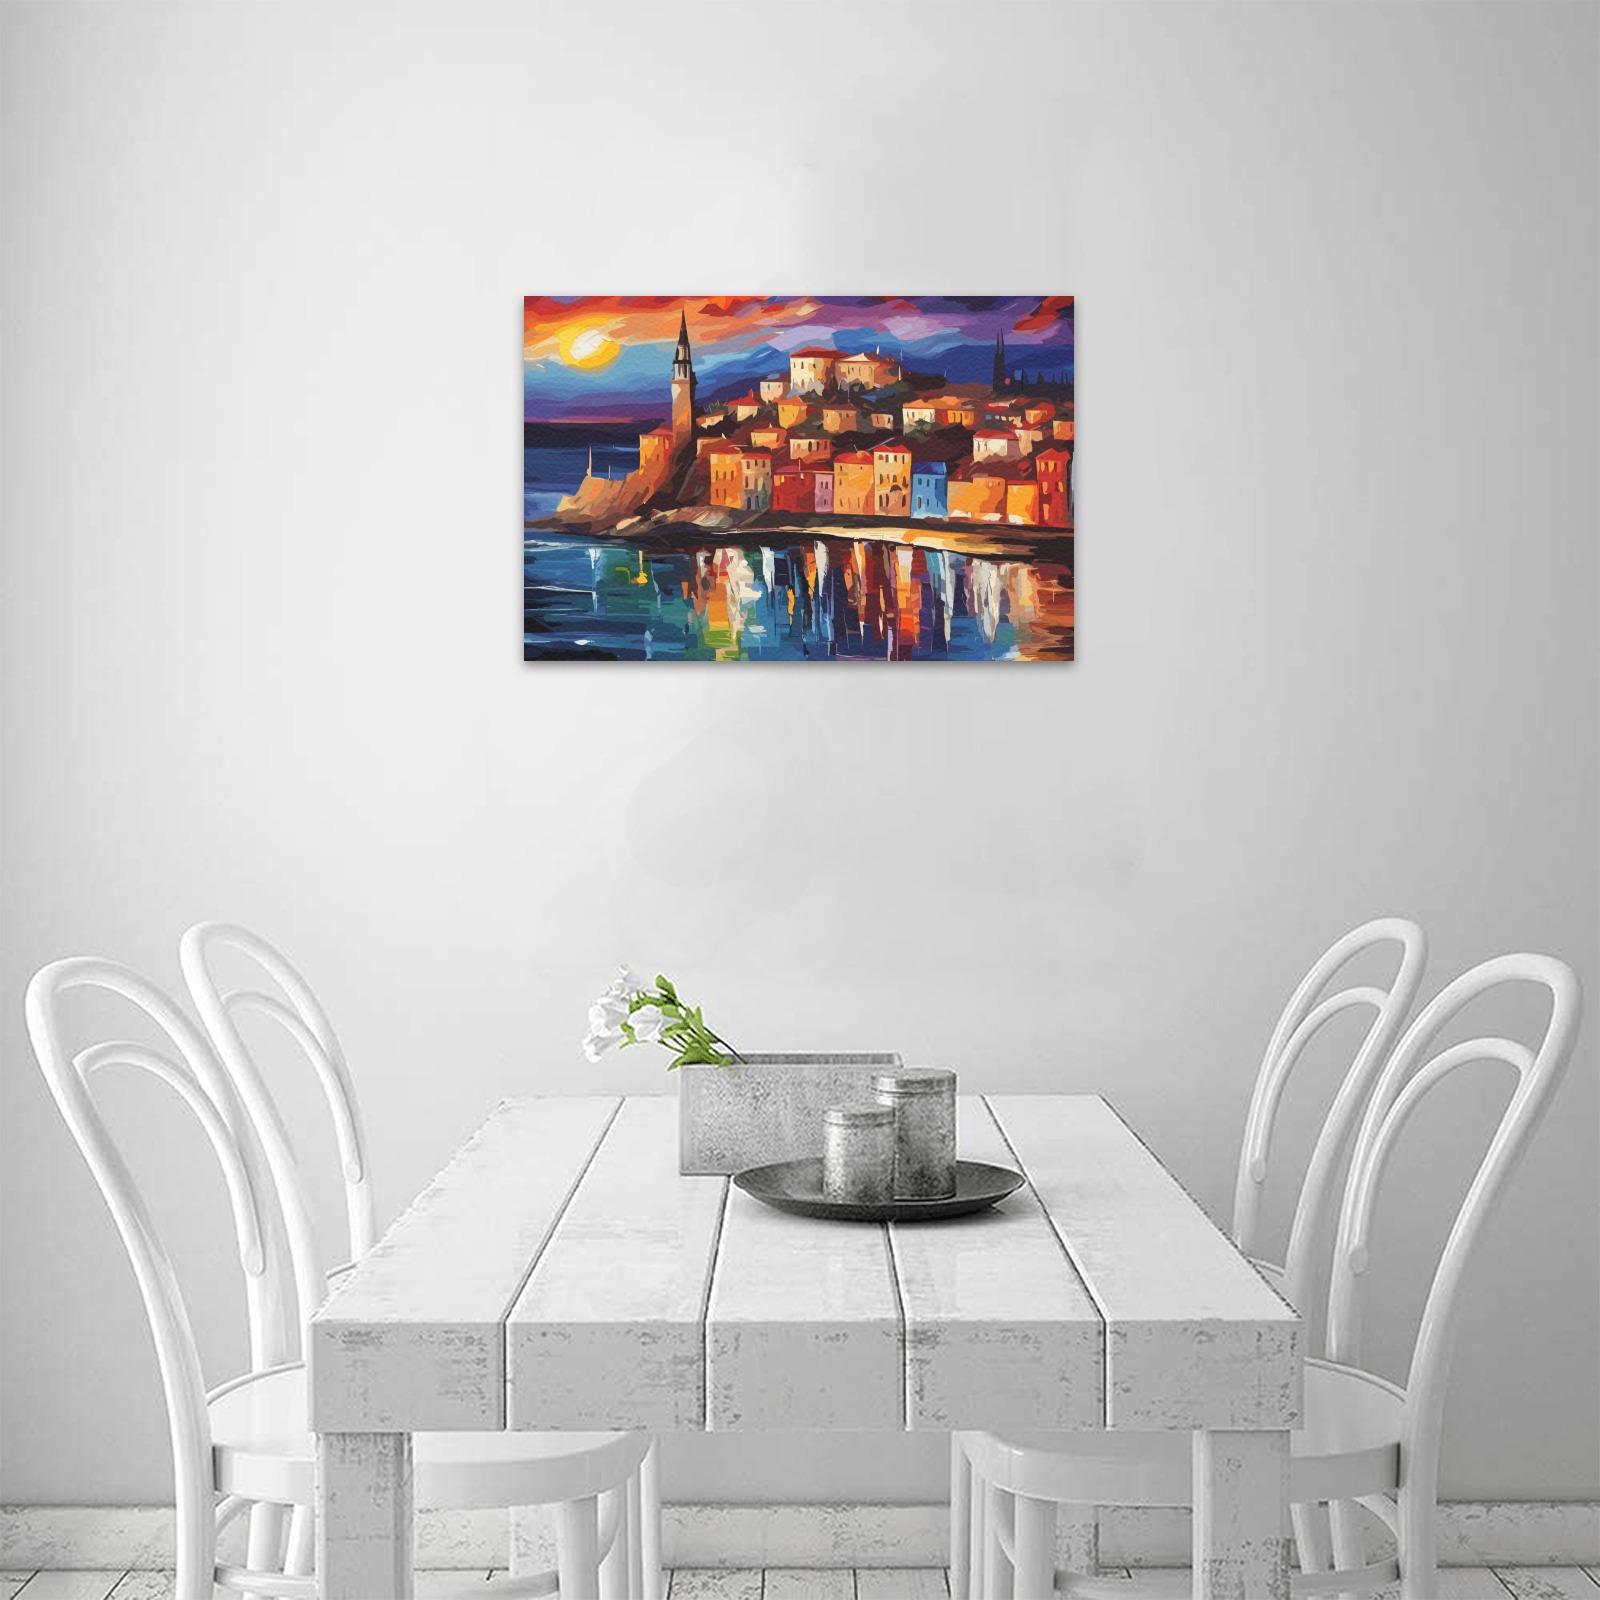 Fantasy city by the warm sea at sunset. Cool art. Upgraded Canvas Print 18"x12"